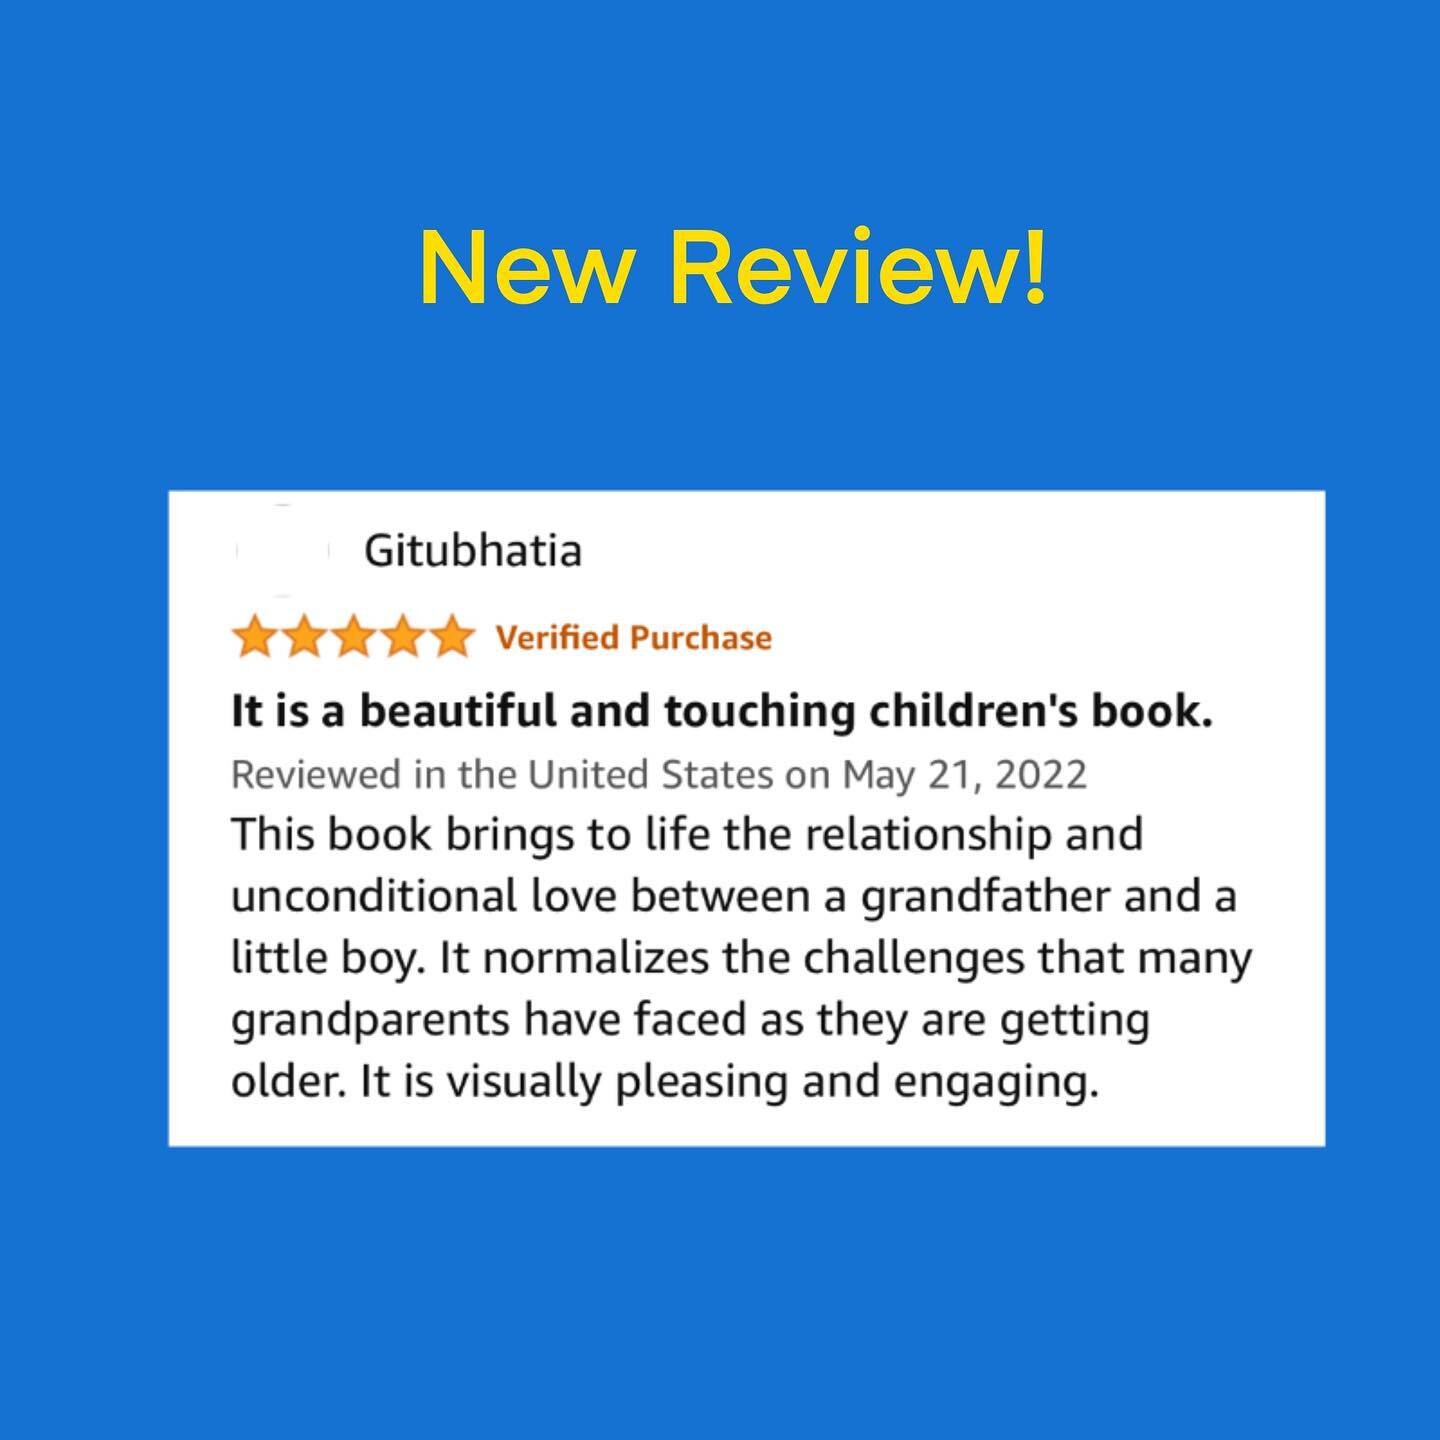 Thank you @dr_gitub2 for supporting @popsonwheels and for such a thoughtful review!!! 
💙💛💙💛💙
.
.
.
.
.
#childrensbooks #bookreview #author #illustrator #wheelchair #disabilitypridemonth #disability